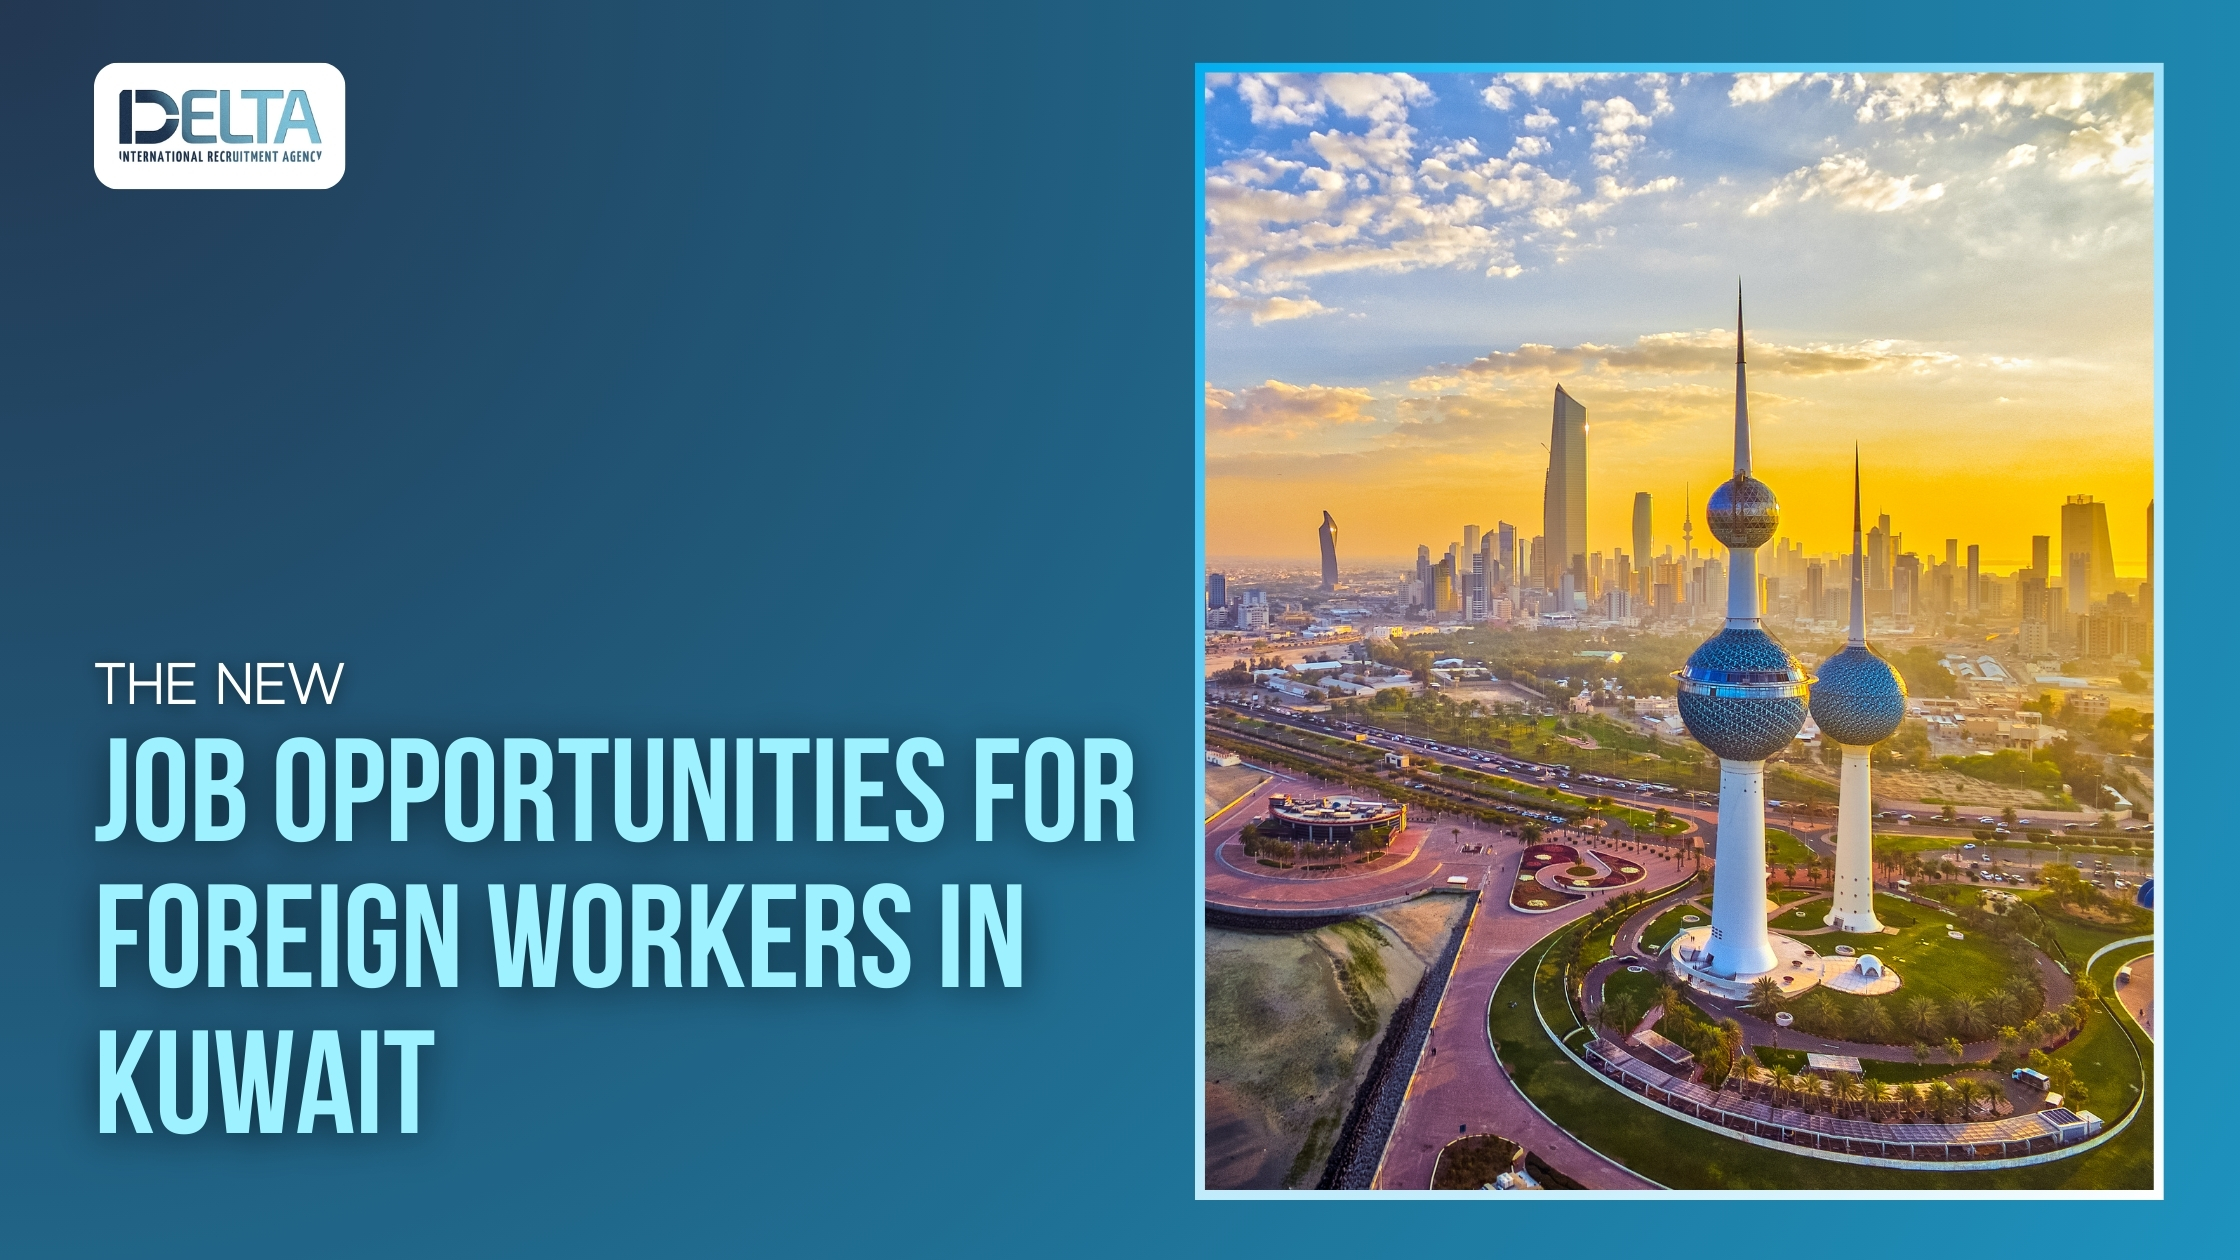 The New Job Opportunities for Foreign Workers in Kuwait